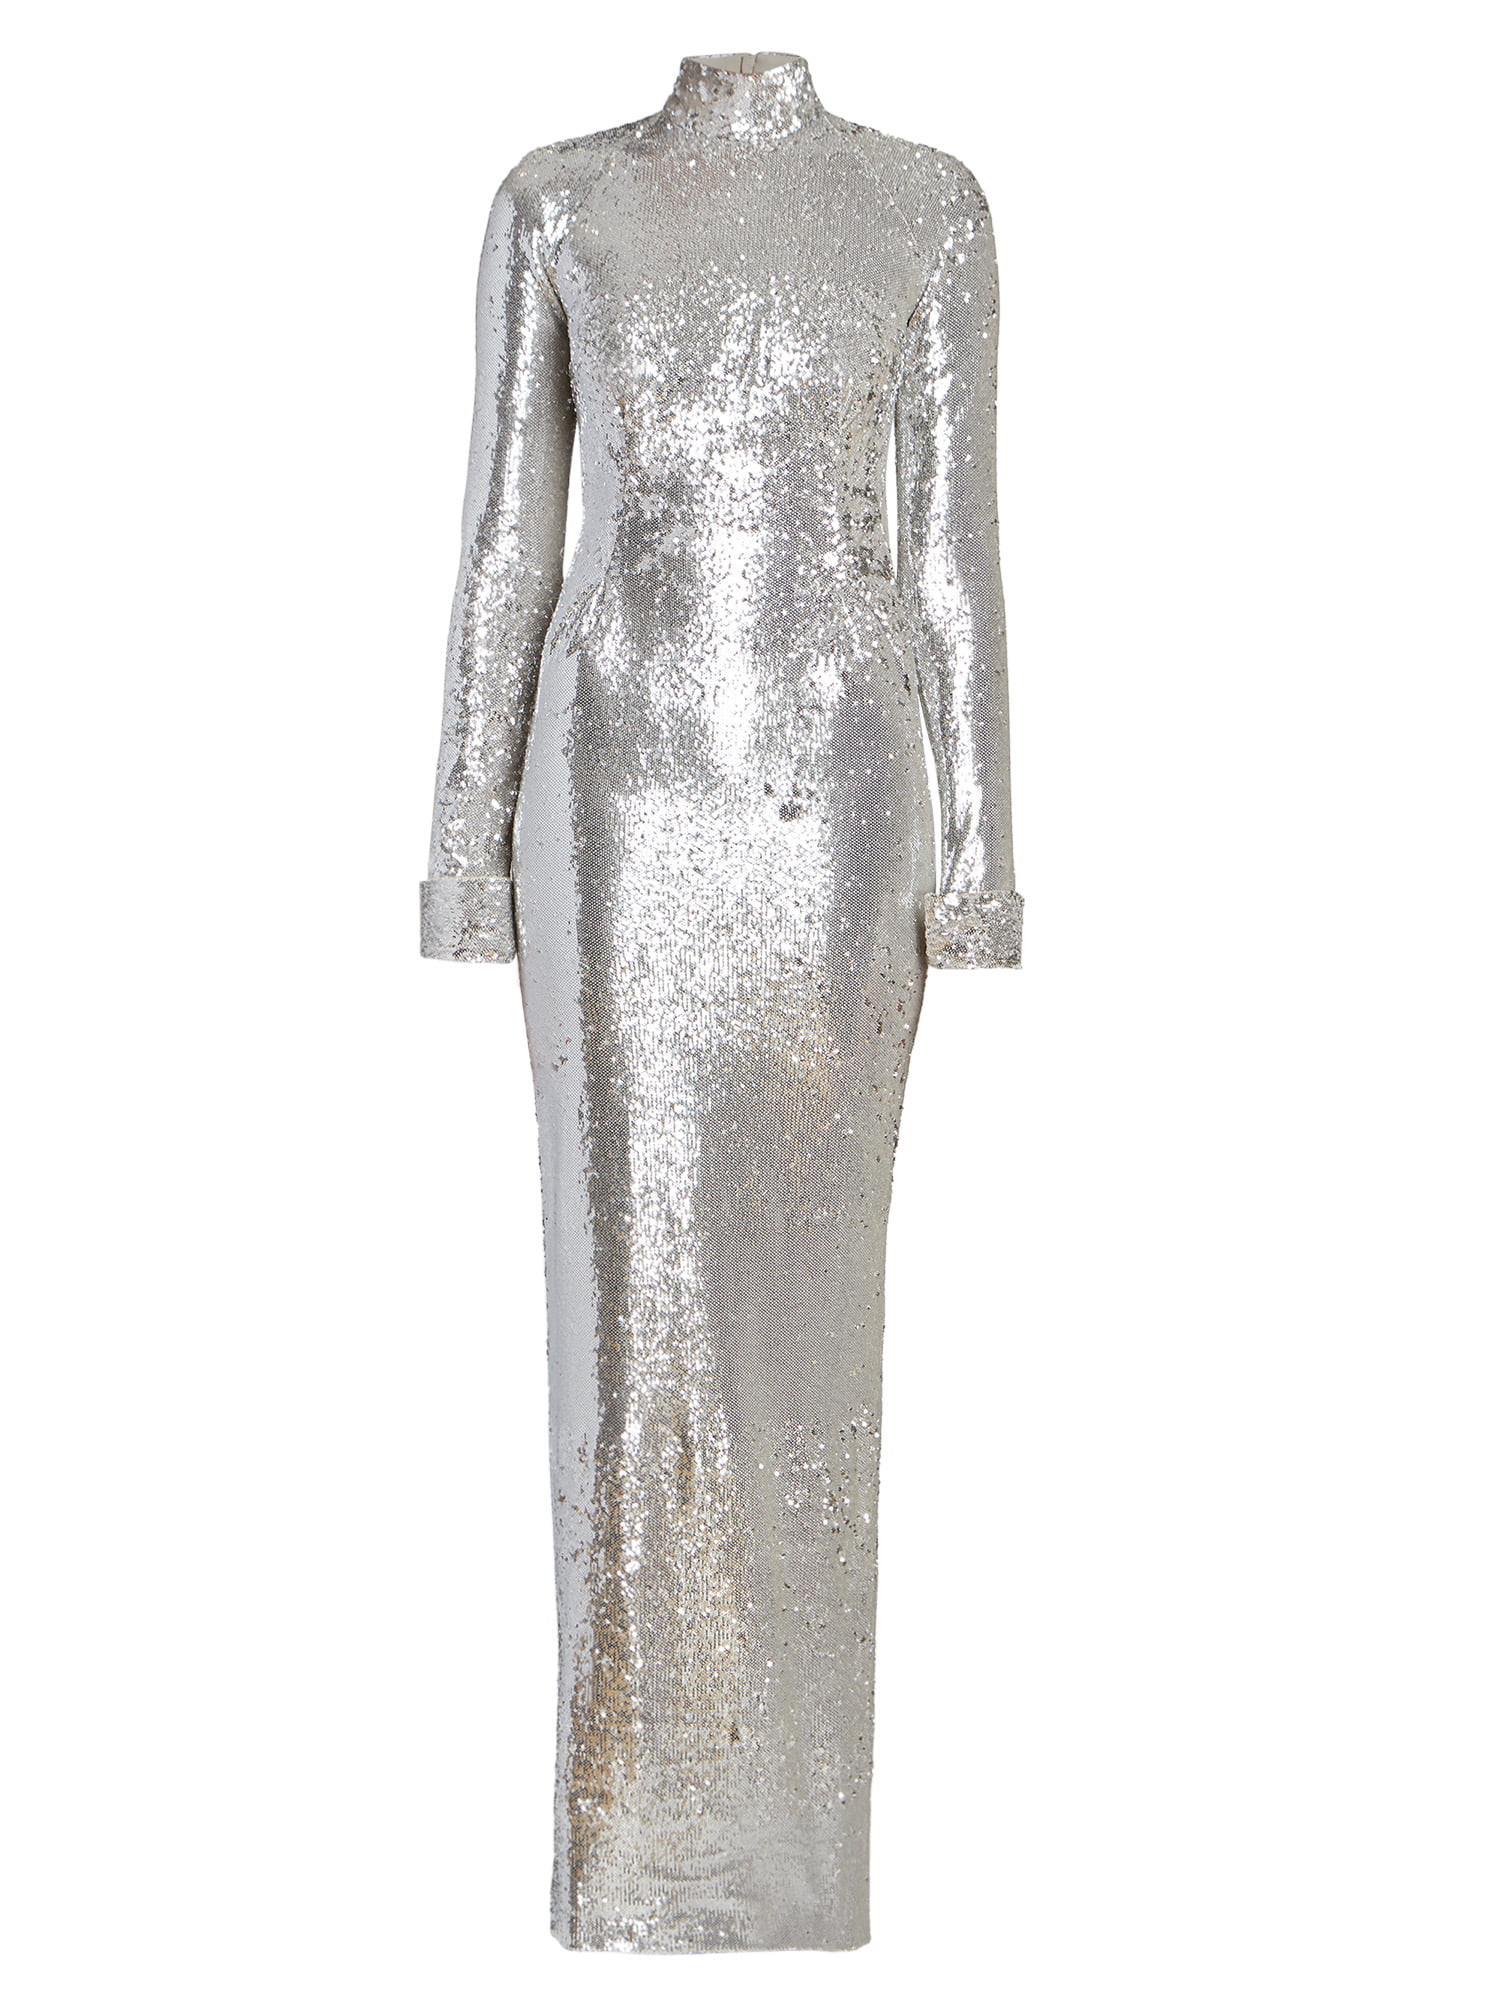 Givenchy Metallic Open Back Gown